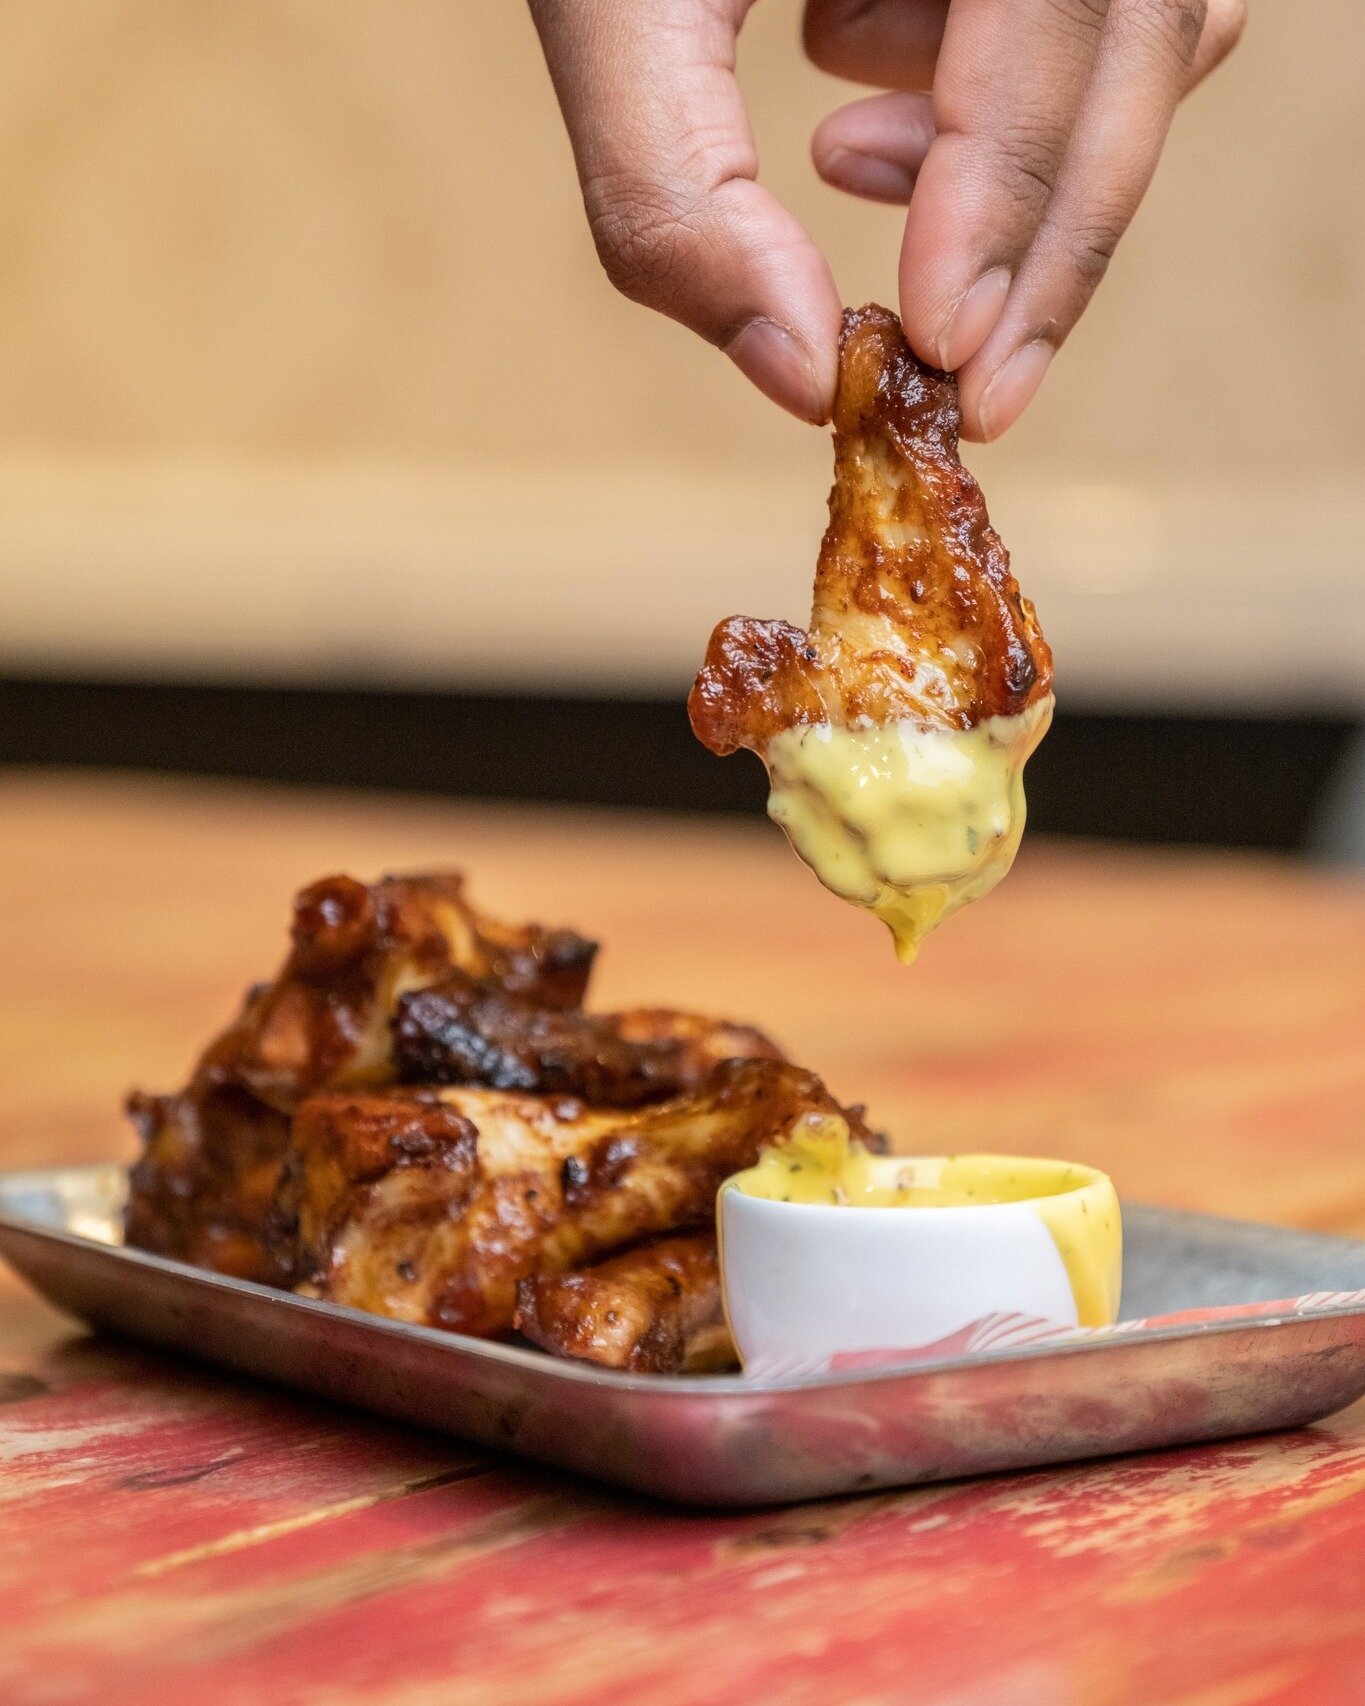 Enjoy this bank holiday at Cristinas! Warning: May cause finger-licking addiction. Proceed with caution when indulging in these BBQ wings! 🍗

Visit us at Cristina&rsquo;s Barking📍

-

#steakhouse #virginmojito #steak #steaktime #restaurantsofinsta 